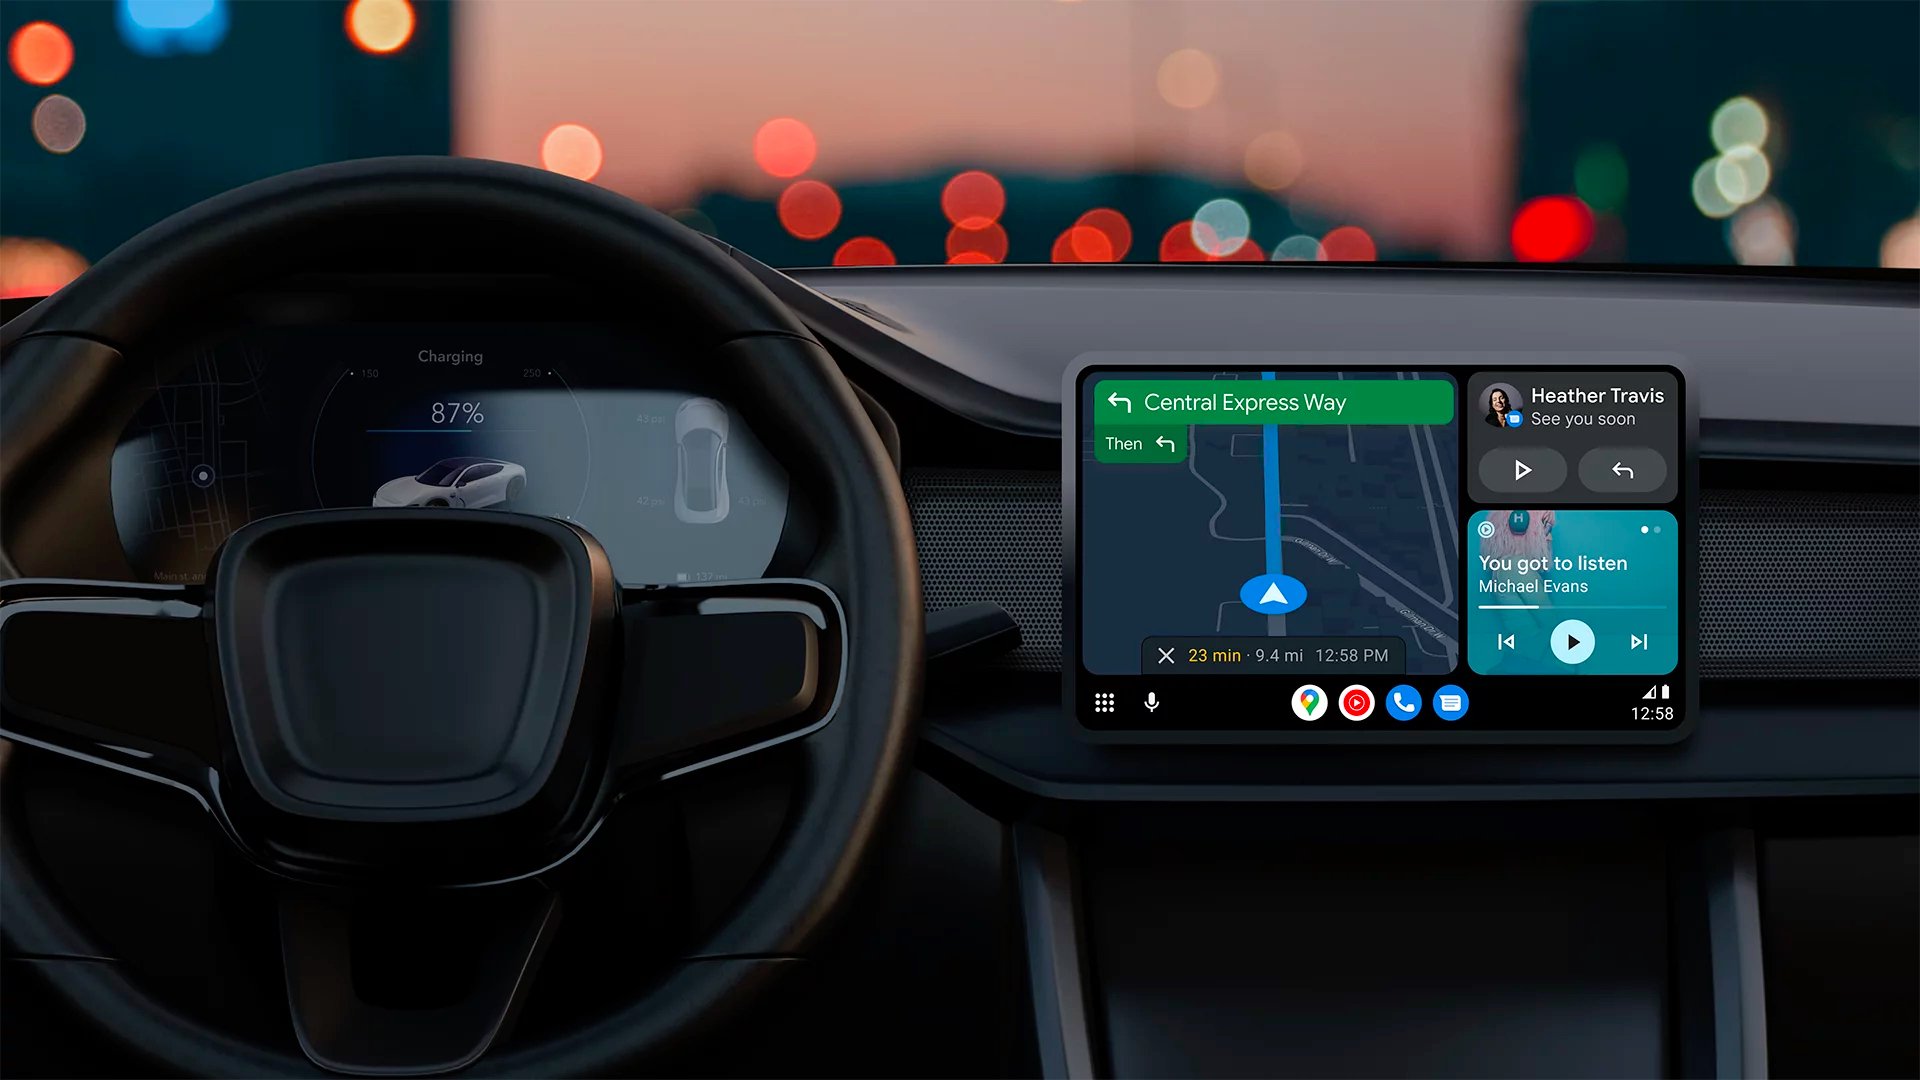 Android Auto's revamped UI design is finally available, but there's a catch  - SamMobile